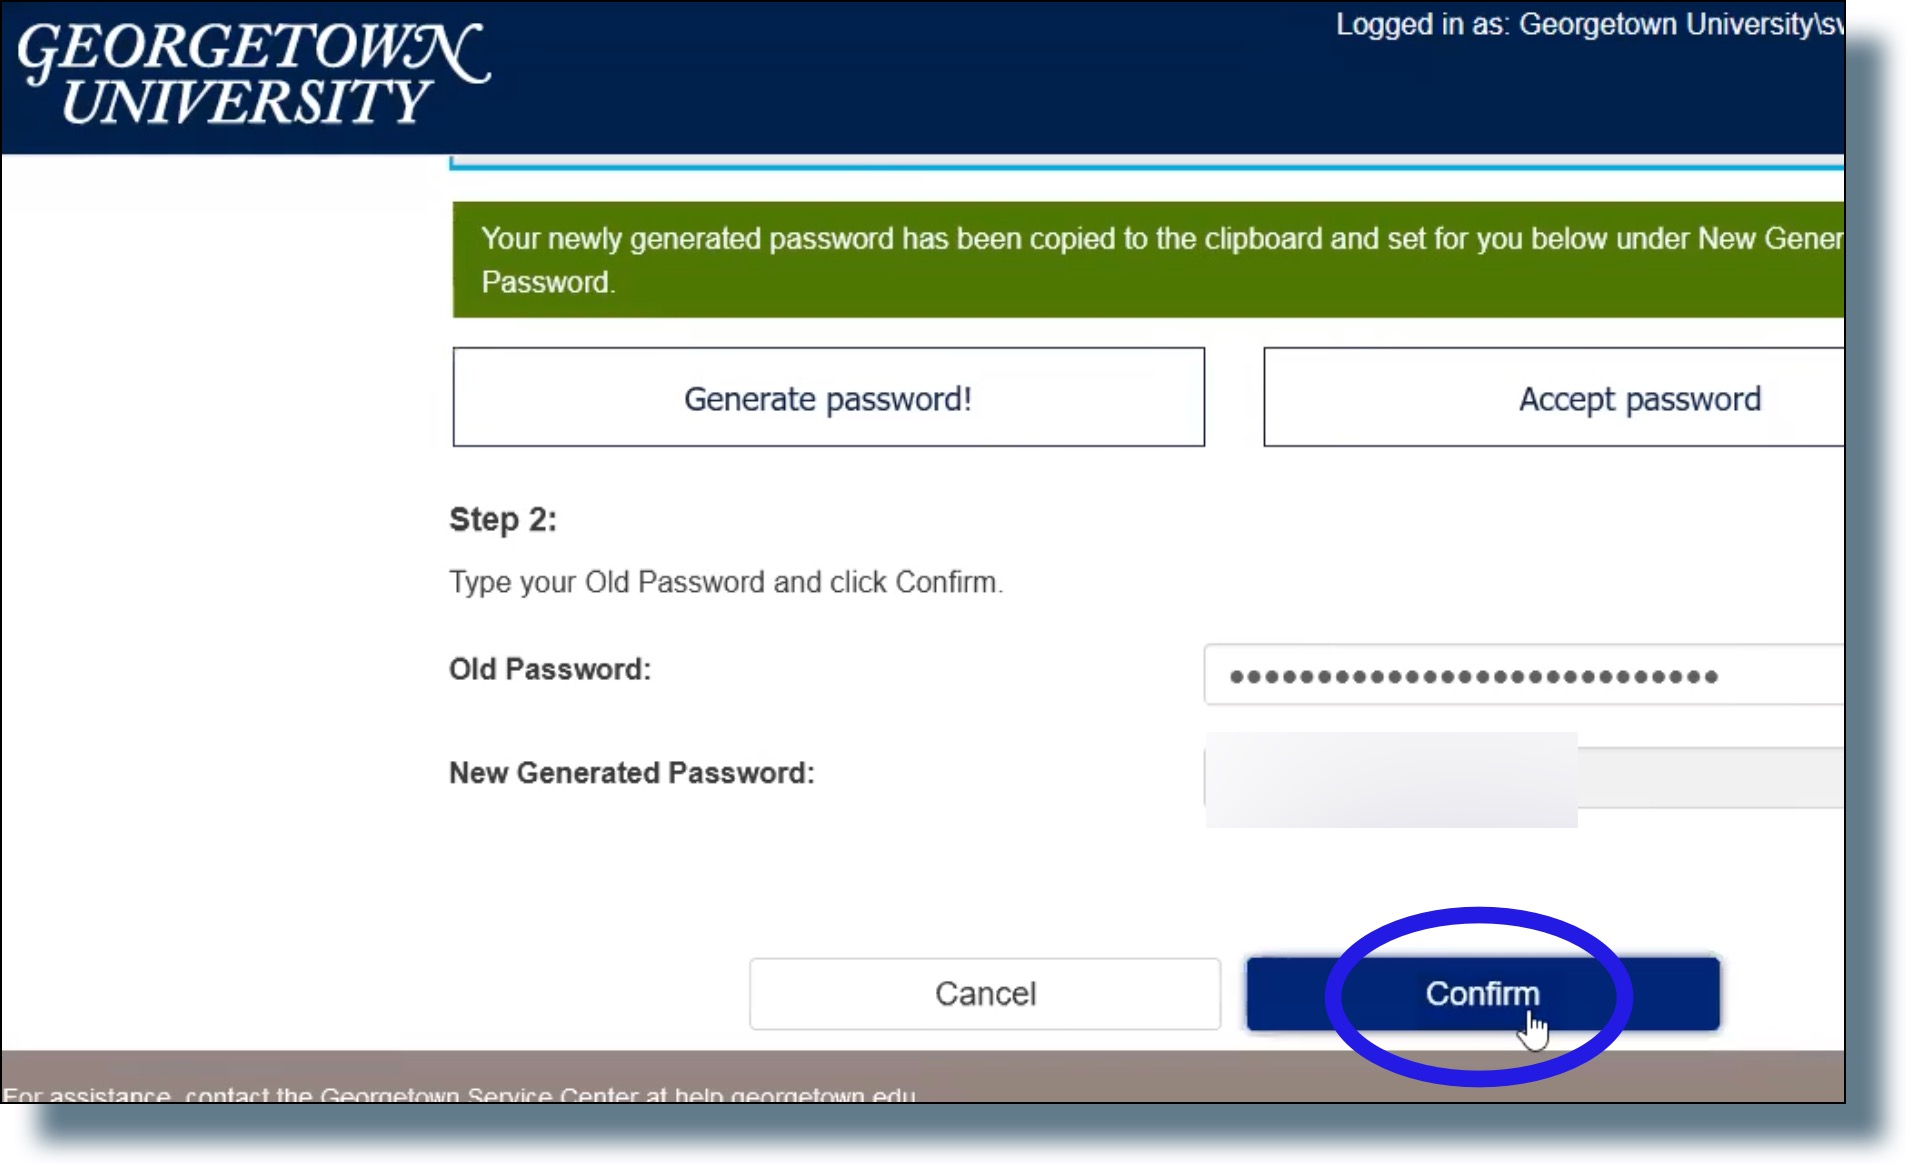 Click 'Accept Password' to accept it, or click 'Generate Password' to display another password. Enter your old (current) password, then click 'Confirm' to change your password.